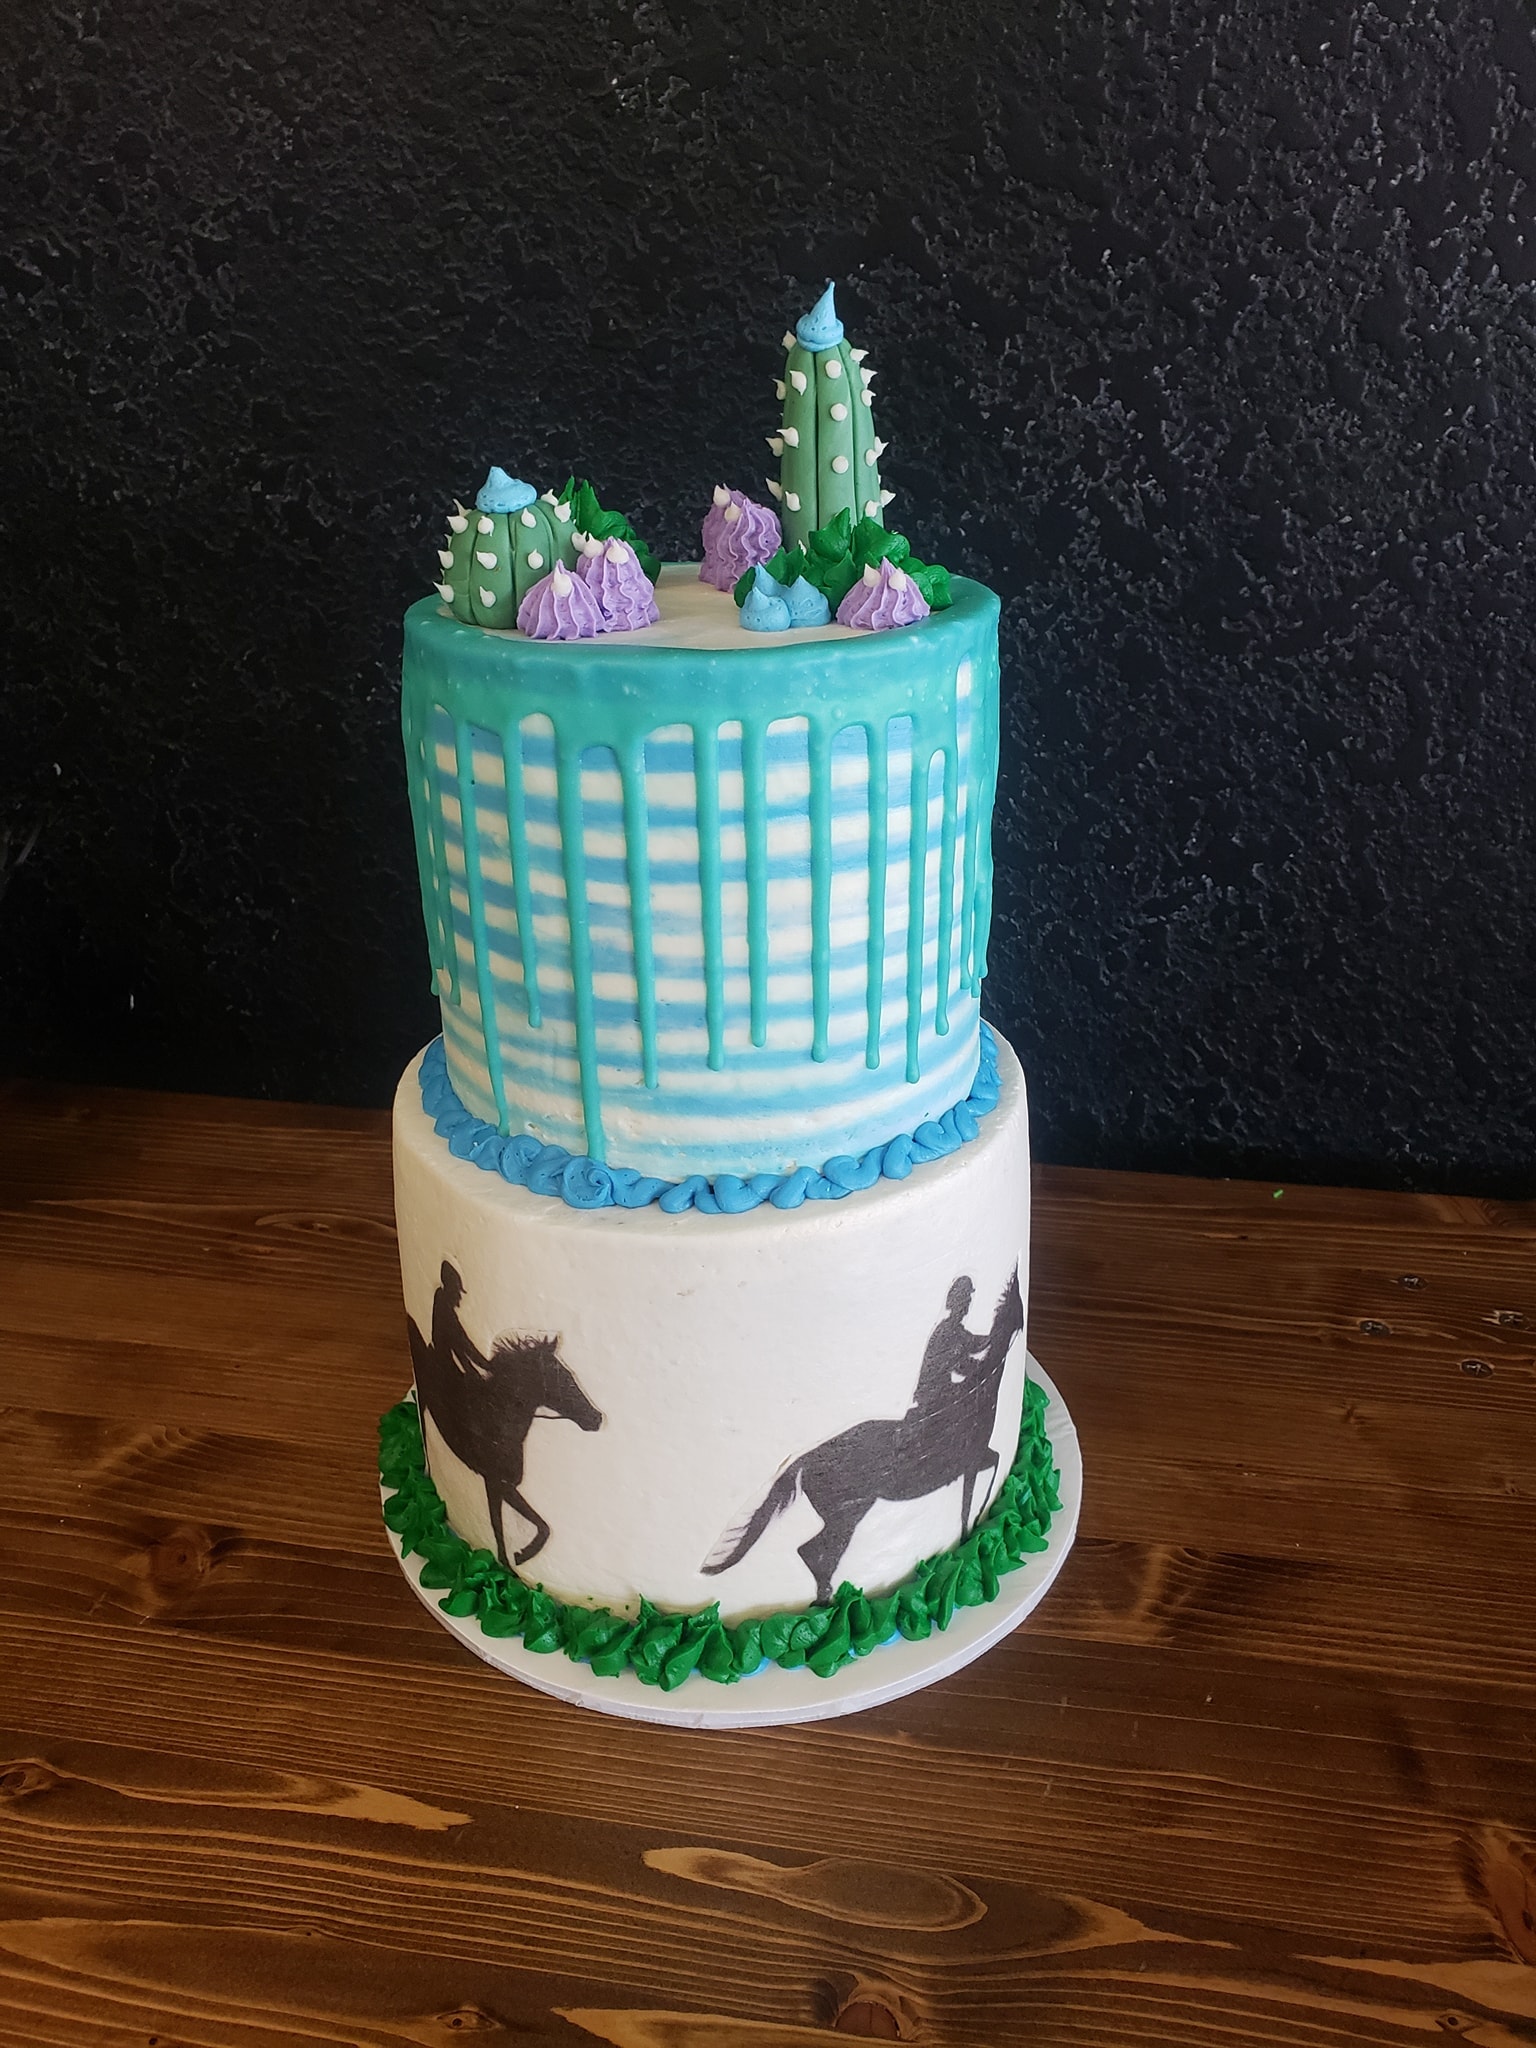 Gallery | The Cake Company of Odessa